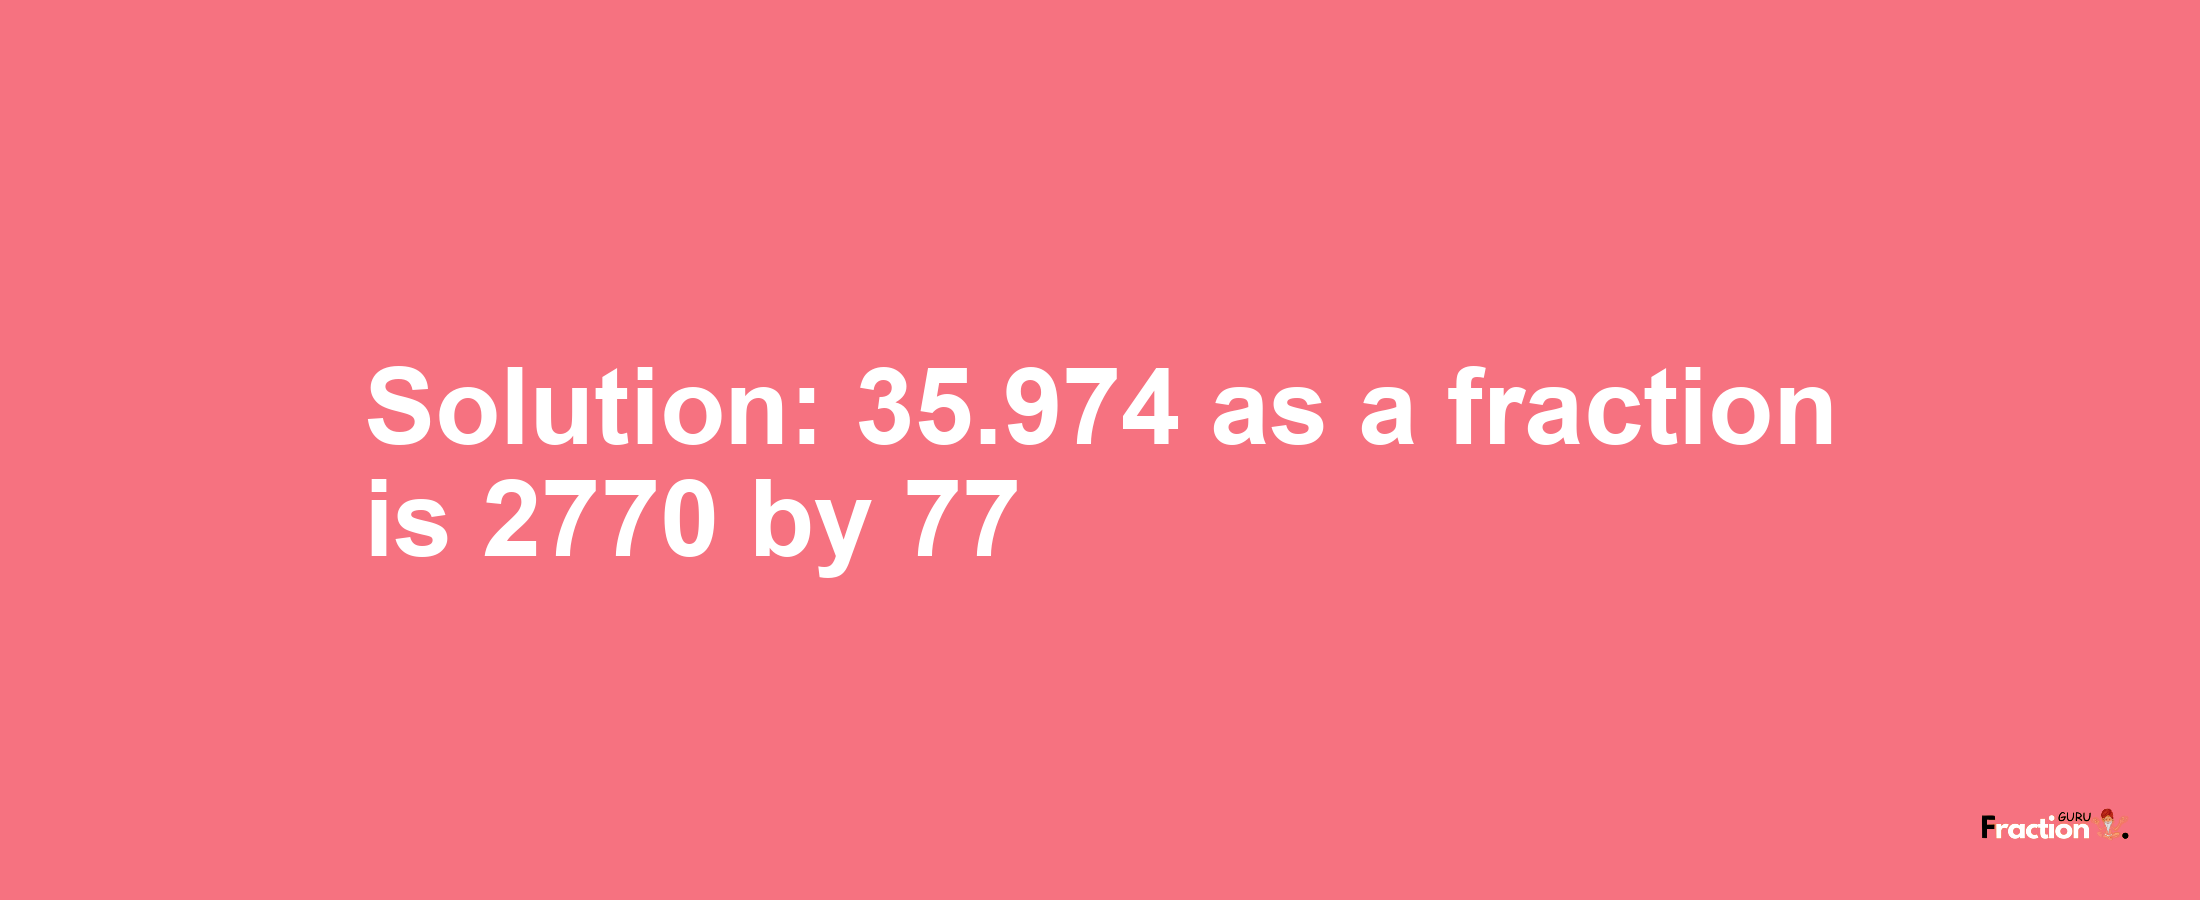 Solution:35.974 as a fraction is 2770/77